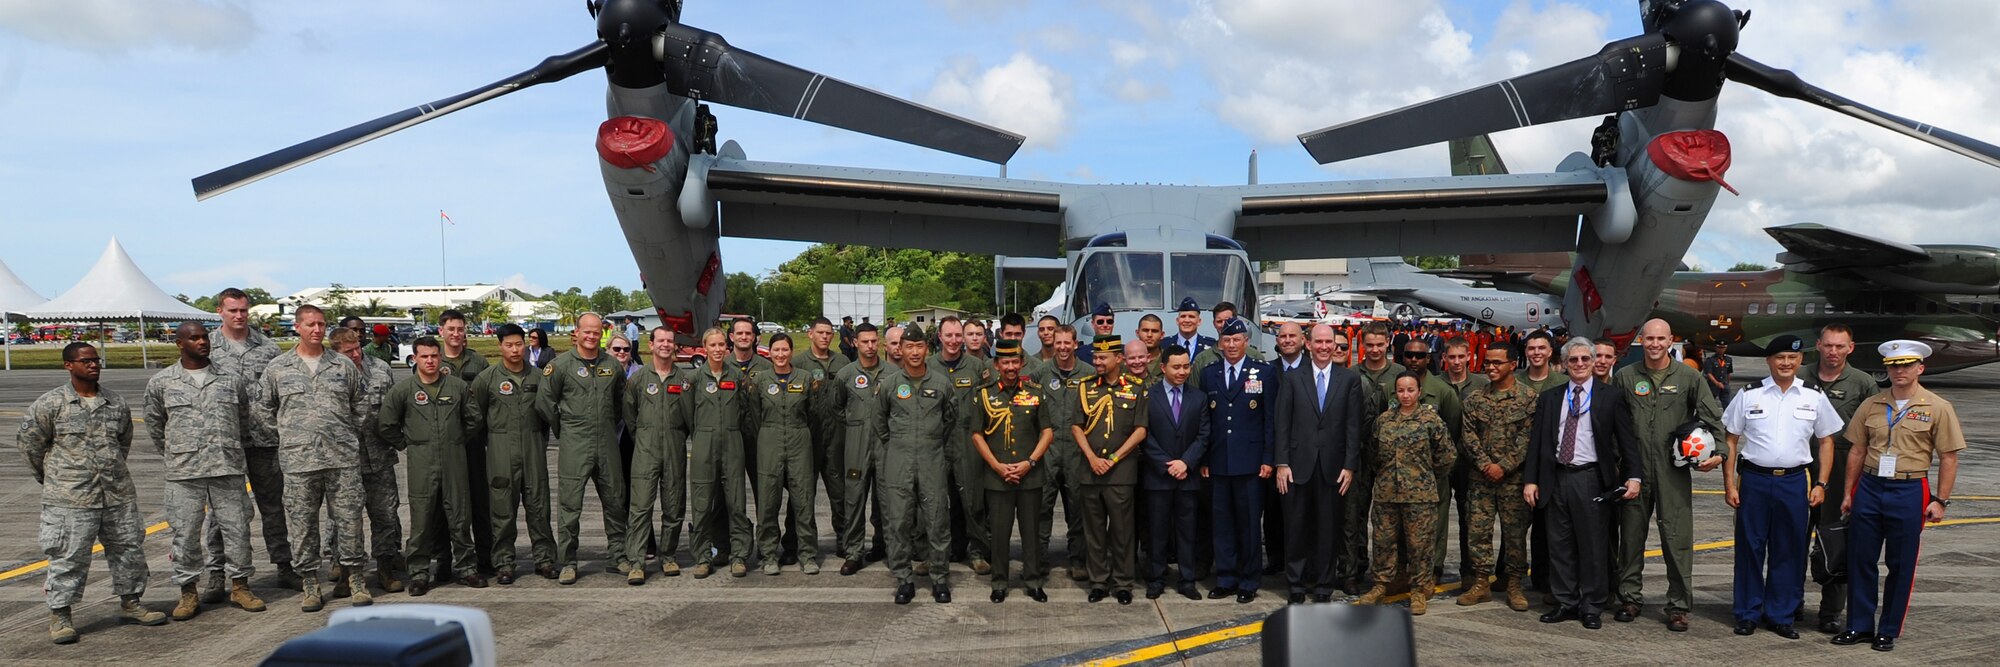 His Majesty Sultan Haji Hassanal Bolkiahsutan of Brunei, poses for group photo with U.S. servicemembers in front of a MV-22B Osprey during the 4th biennial Brunei Darussalam International Defense Exhibition at Rimba Air Base, Dec. 3, 2013. BRIDEX 13 is an opportunity for networking and sharing technology with regional partners and allies, building strong multilateral relationships, increased cooperation and enhanced preparedness for disasters and other contingency operations. (U.S. Air Force photo/Master Sgt. Jerome S. Tayborn)